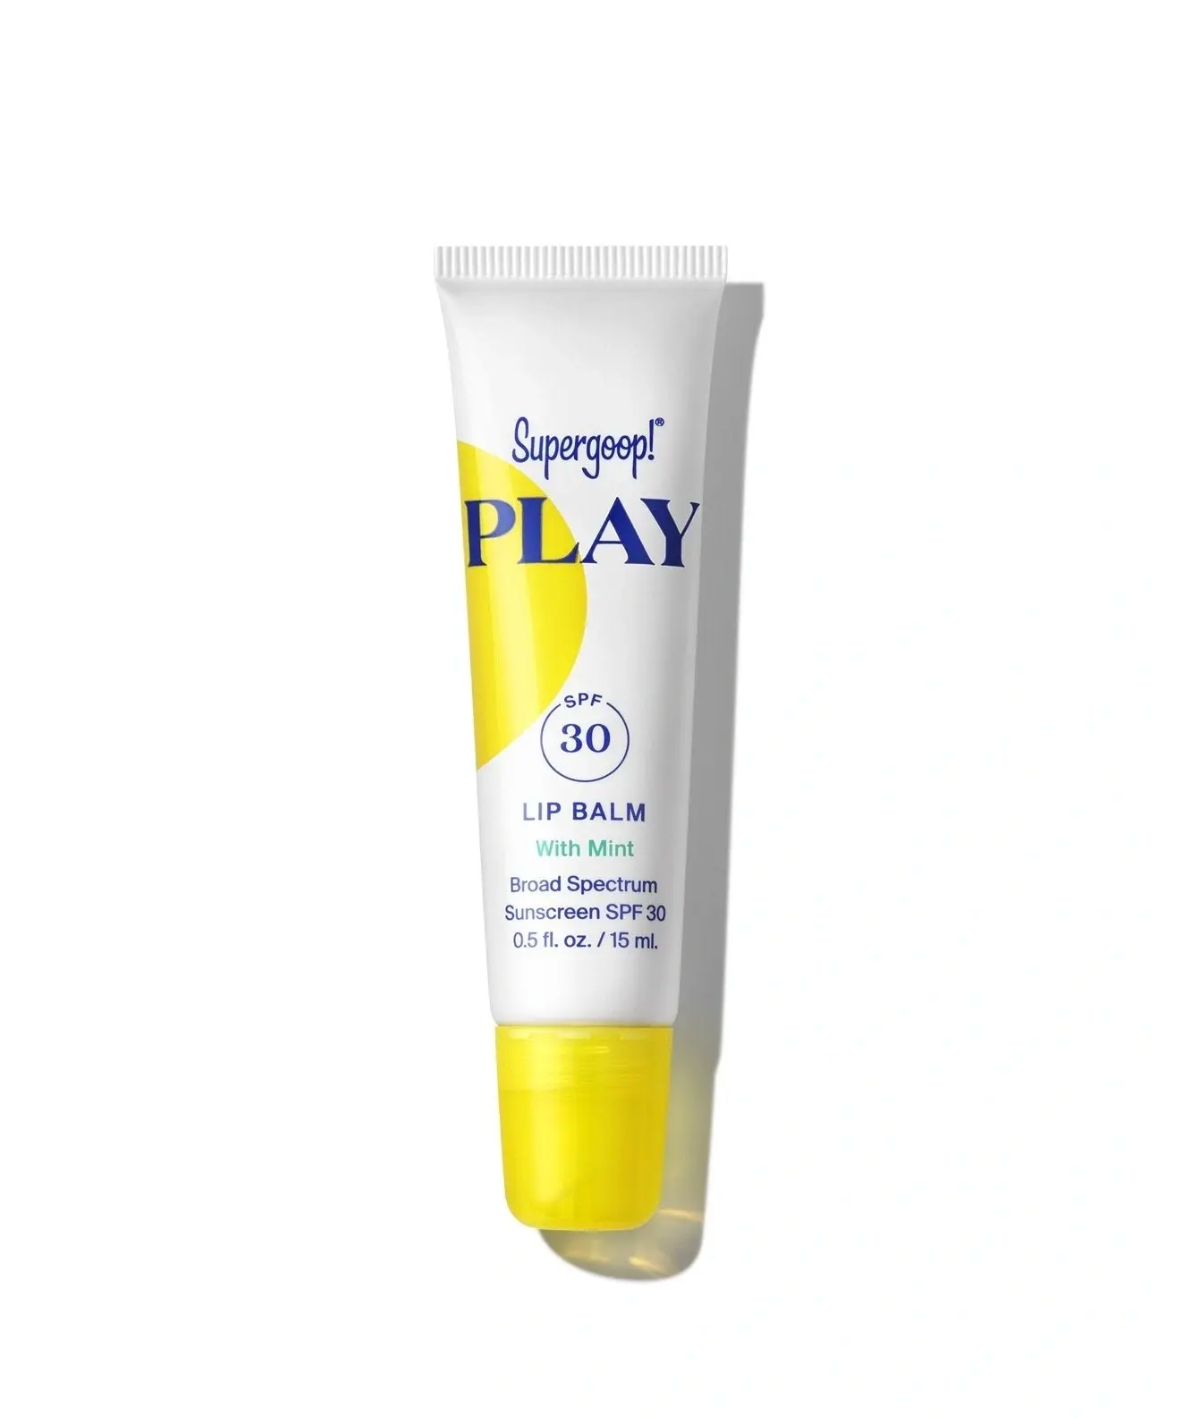 PLAY LIP BALM SPF 30 WITH MINT